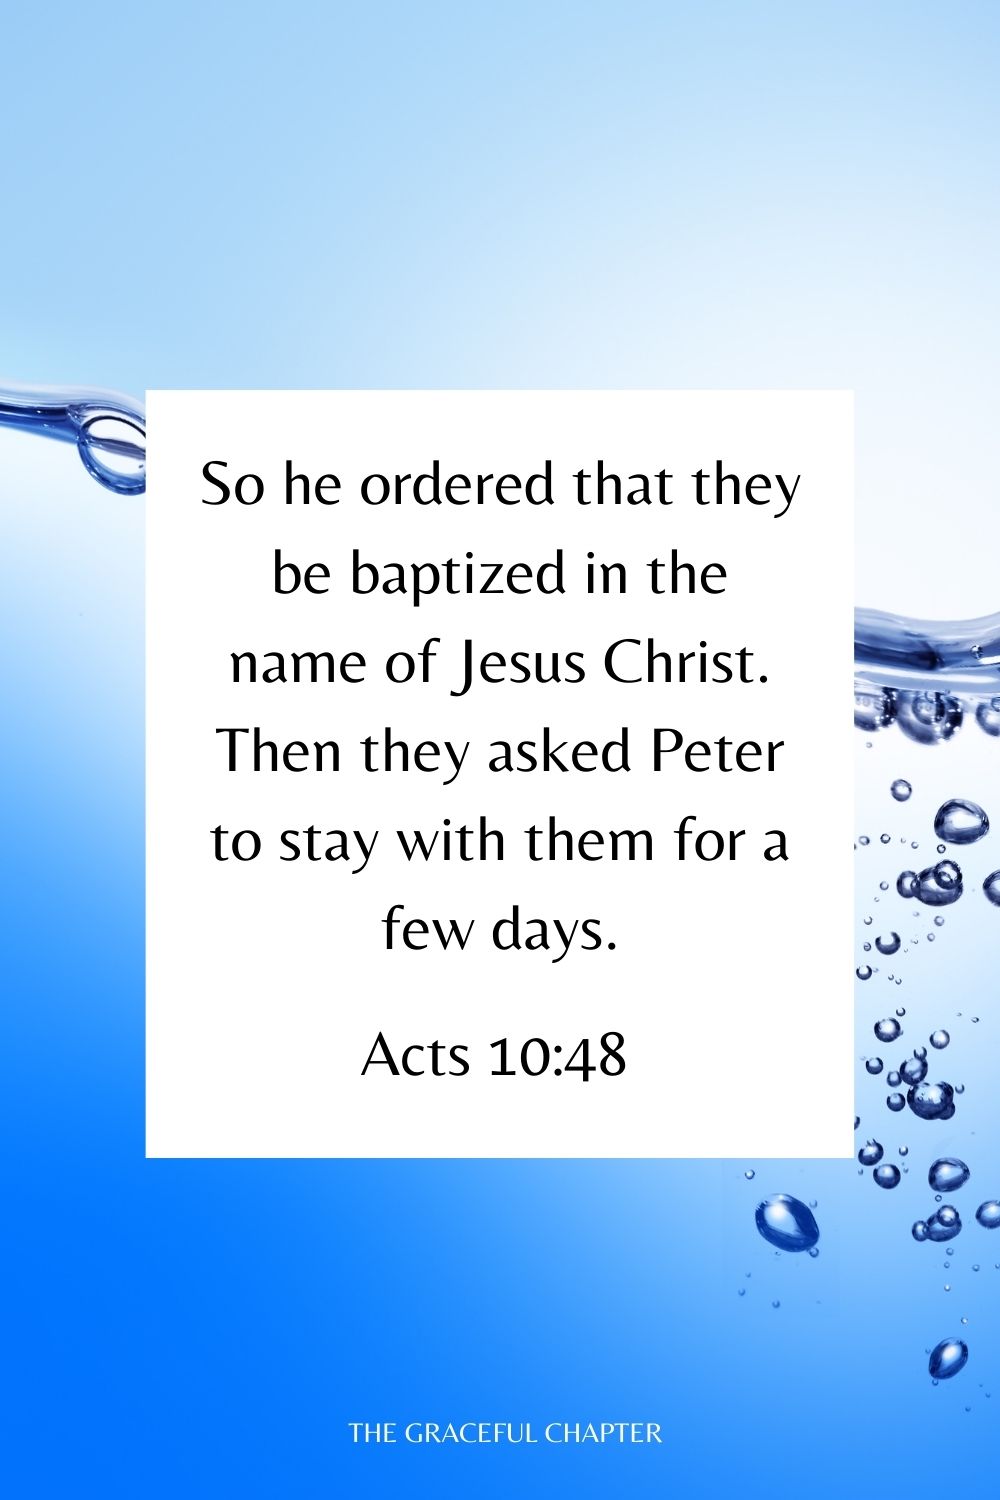 So he ordered that they be baptized in the name of Jesus Christ. Then they asked Peter to stay with them for a few days. Acts 10:48